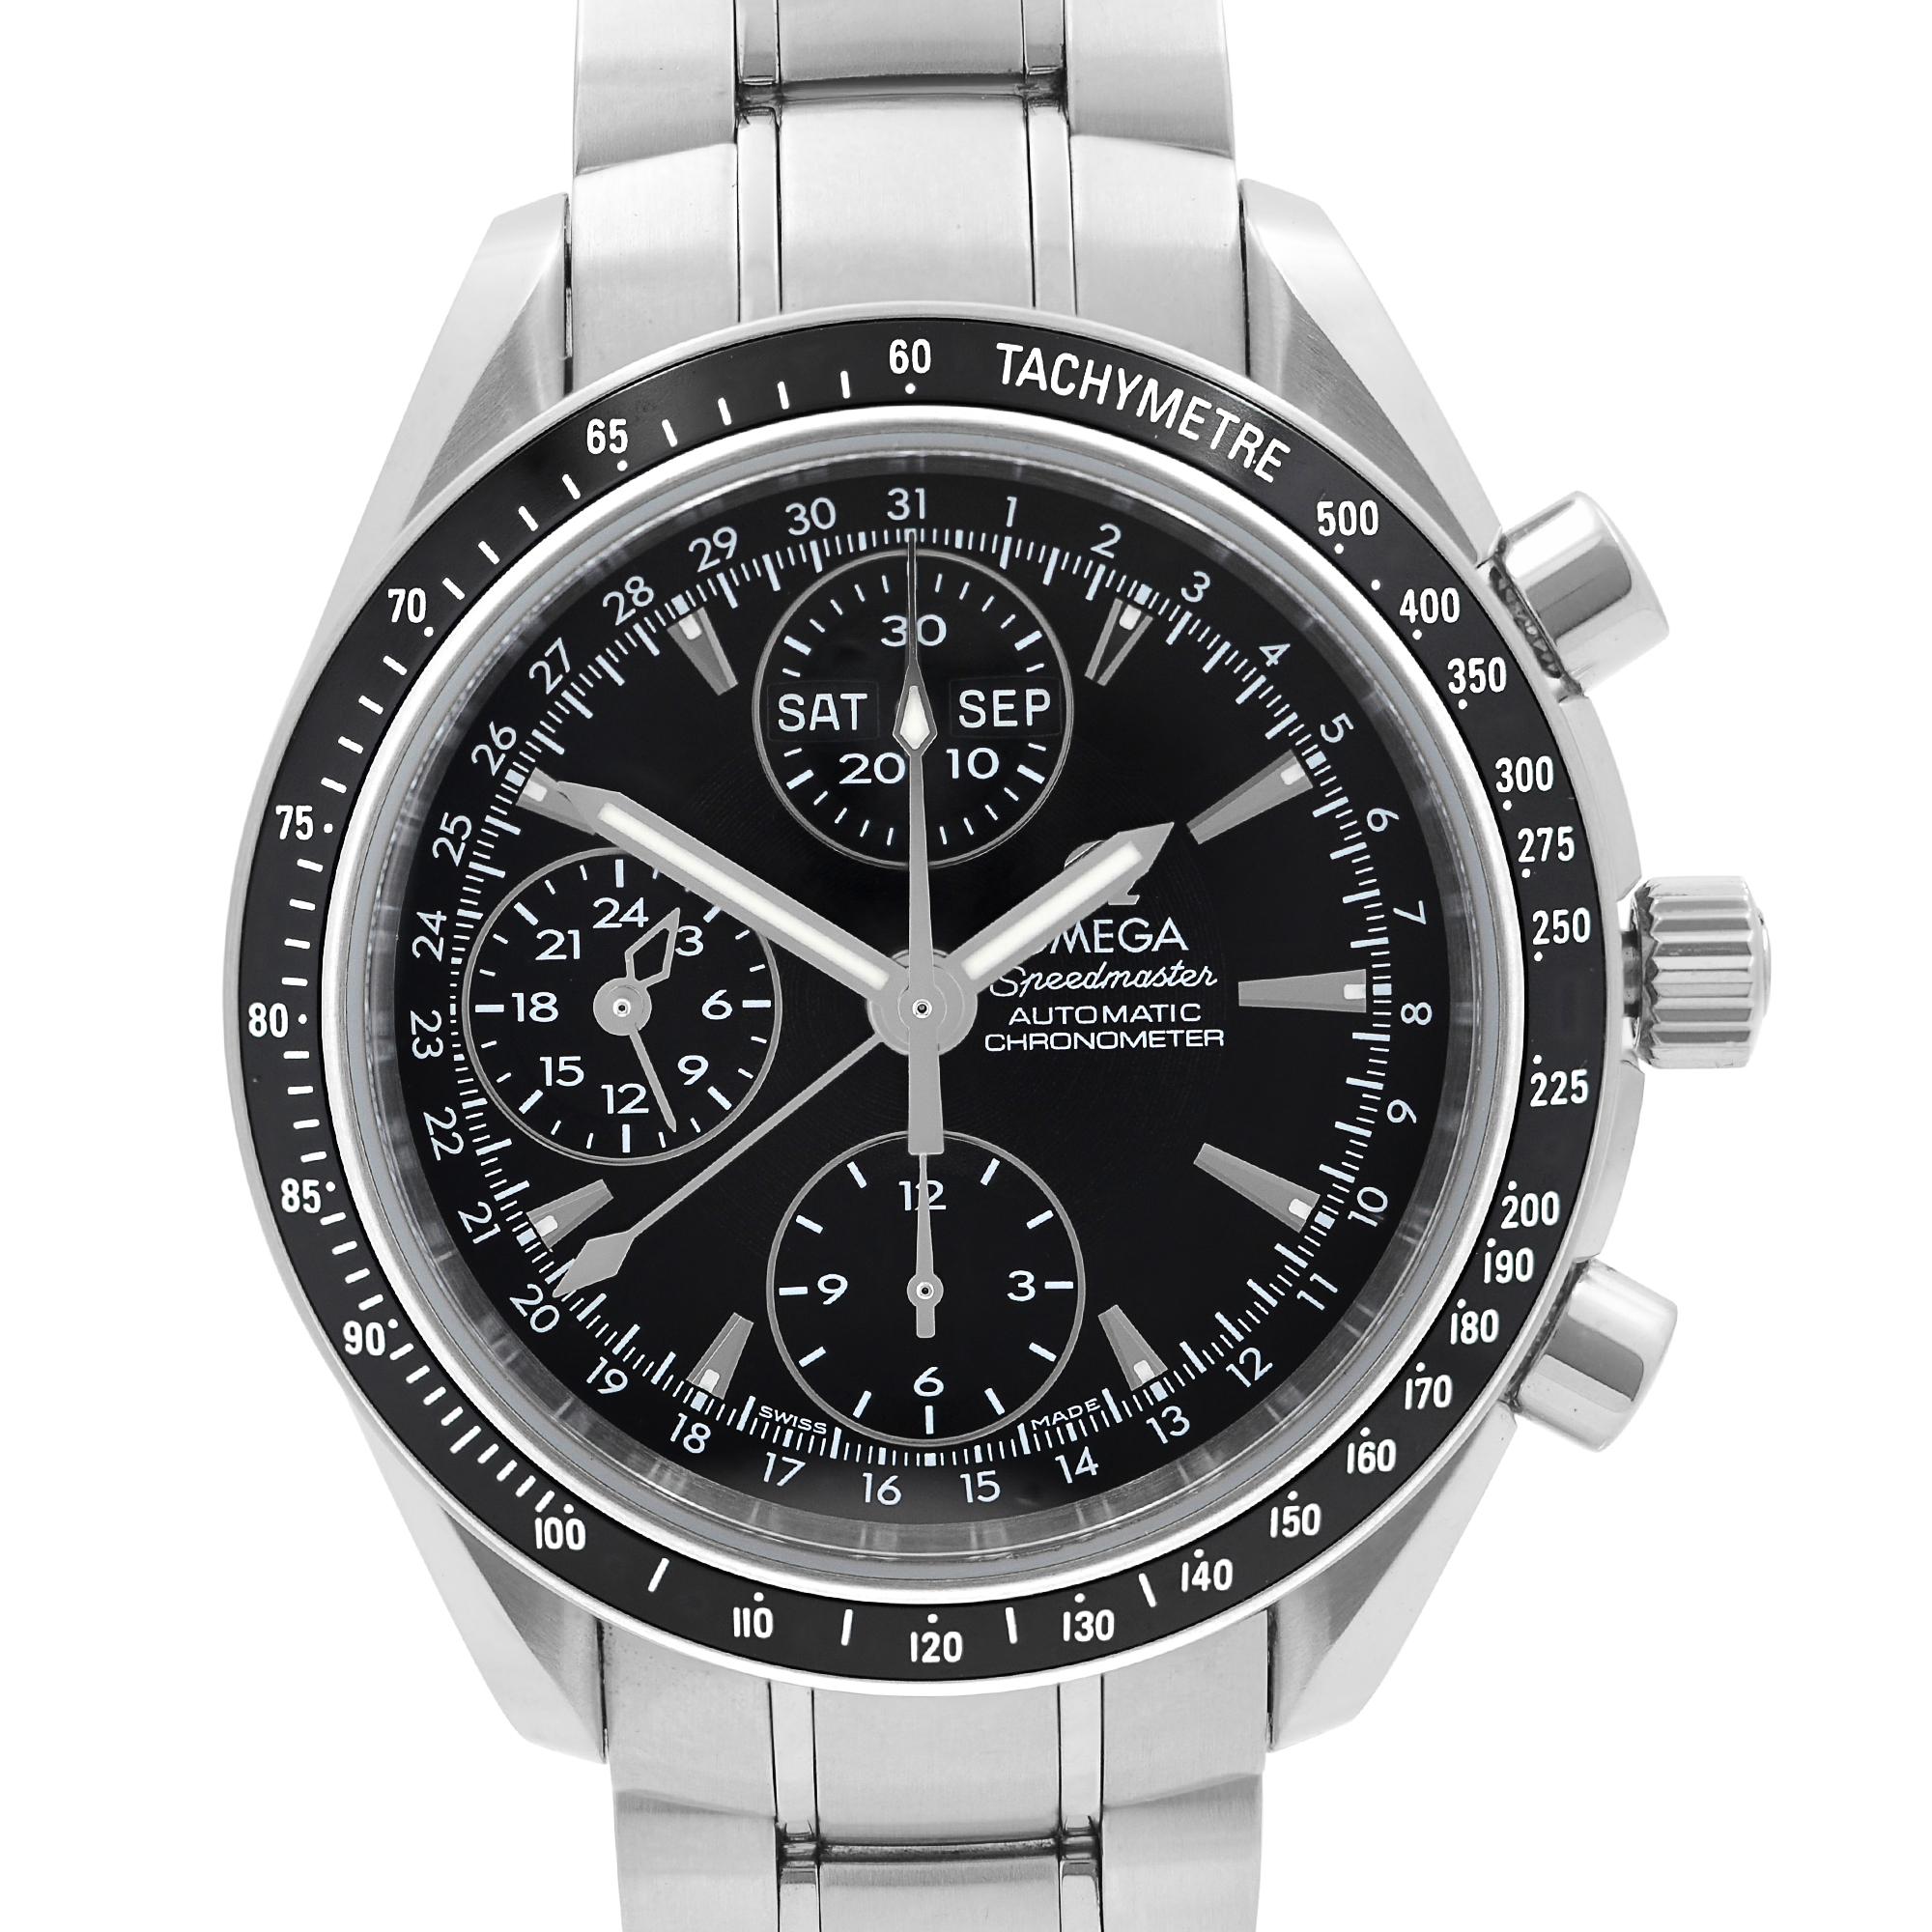 Features: Stainless Steel Case & Bracelet, Fixed  Stainless Steel Bezel with Black Tachymeter Insert, Black Dial With Luminous Silver-Tone Hands, and Index Hour Markers. Date Displays on the Outer Rim of the Dial. Seconds Sub-dial, Chronograph - 3